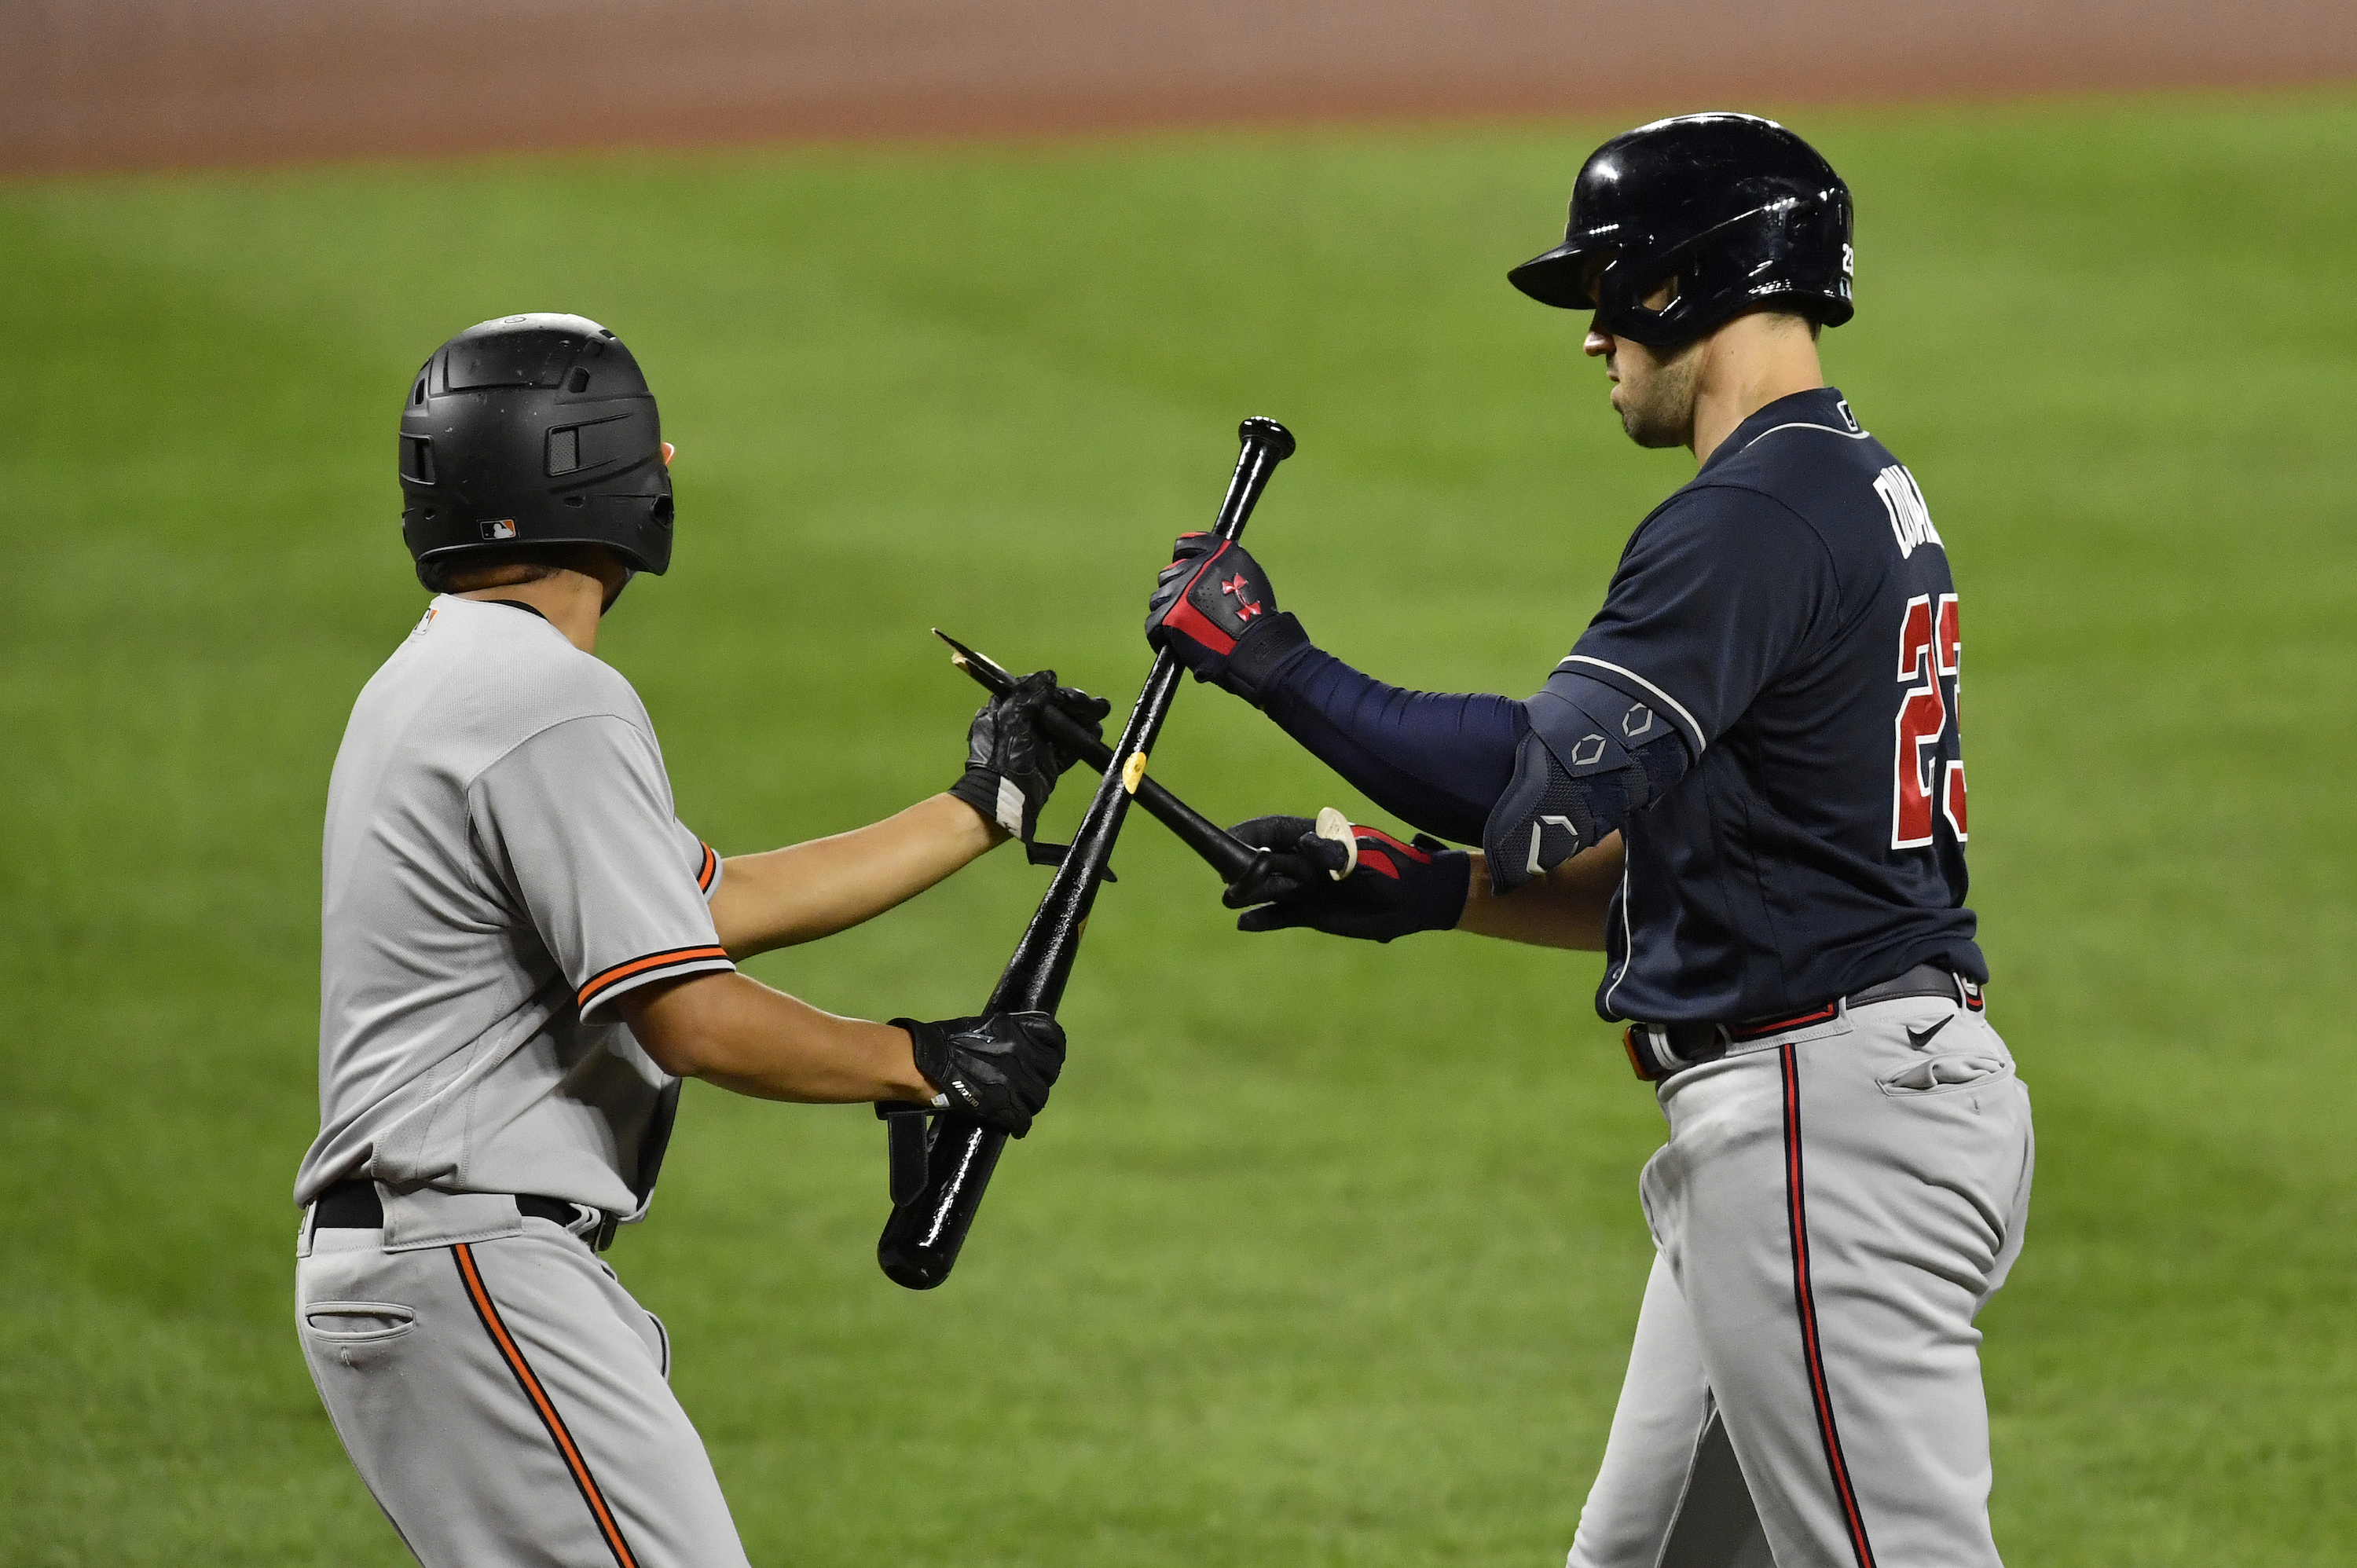 Atlanta Braves left fielder Adam Duvall (23) exchanges a broken bat handle for a new bat with a bat boy during the Atlanta Braves vs. Baltimore Orioles MLB game at Oriole Park at Camden Yards on September 15, 2020 in Baltimore, MD.